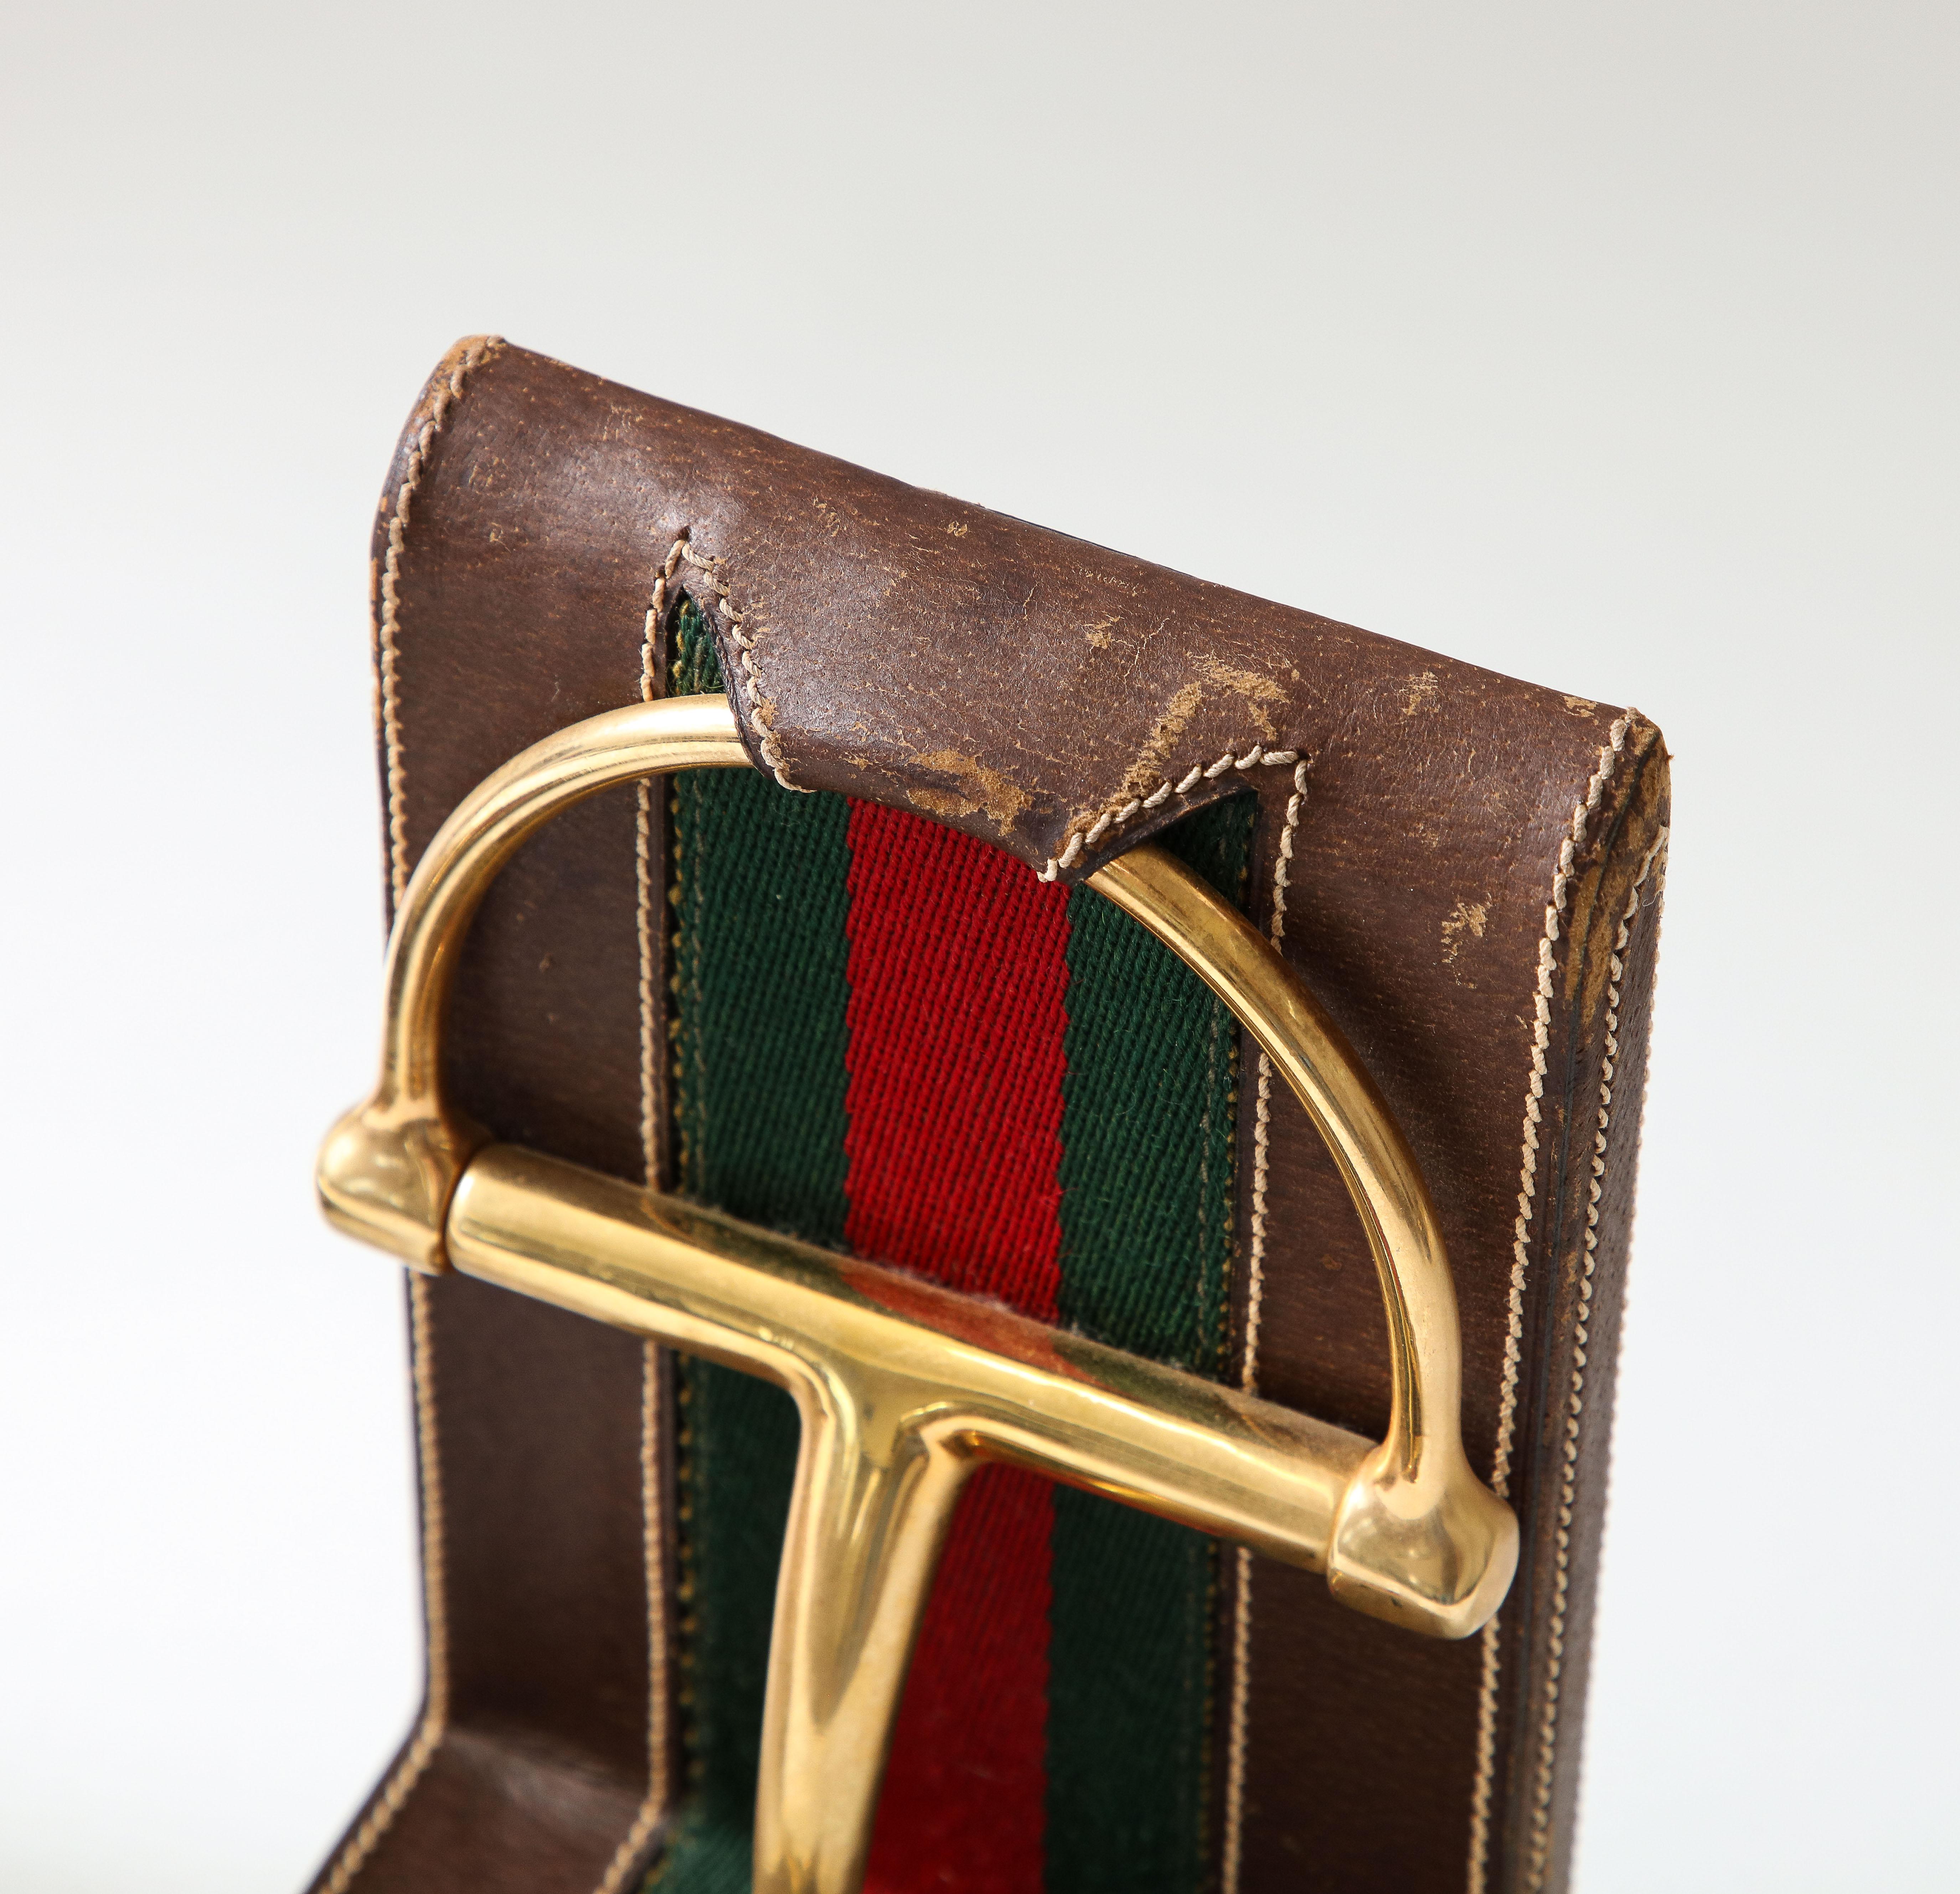 Pair of Leather and Brass Bookends, Gucci, Italy, c. 1970 For Sale 9